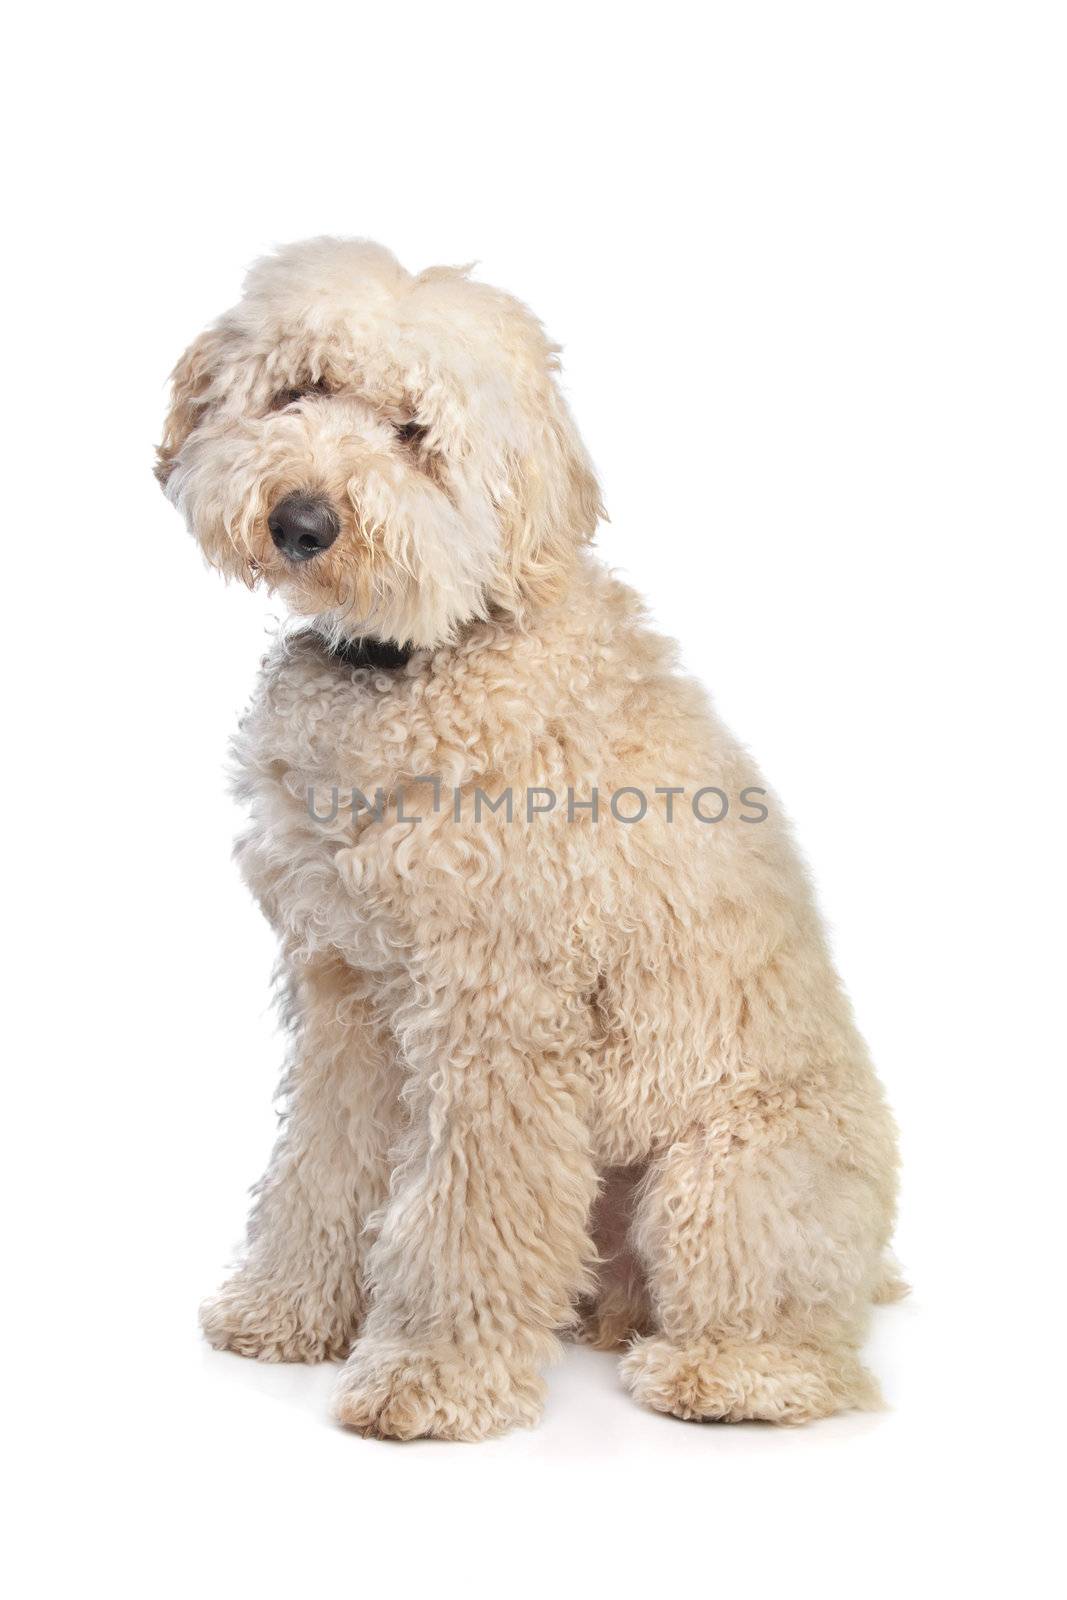 Australian Labradoodle in front of a white background